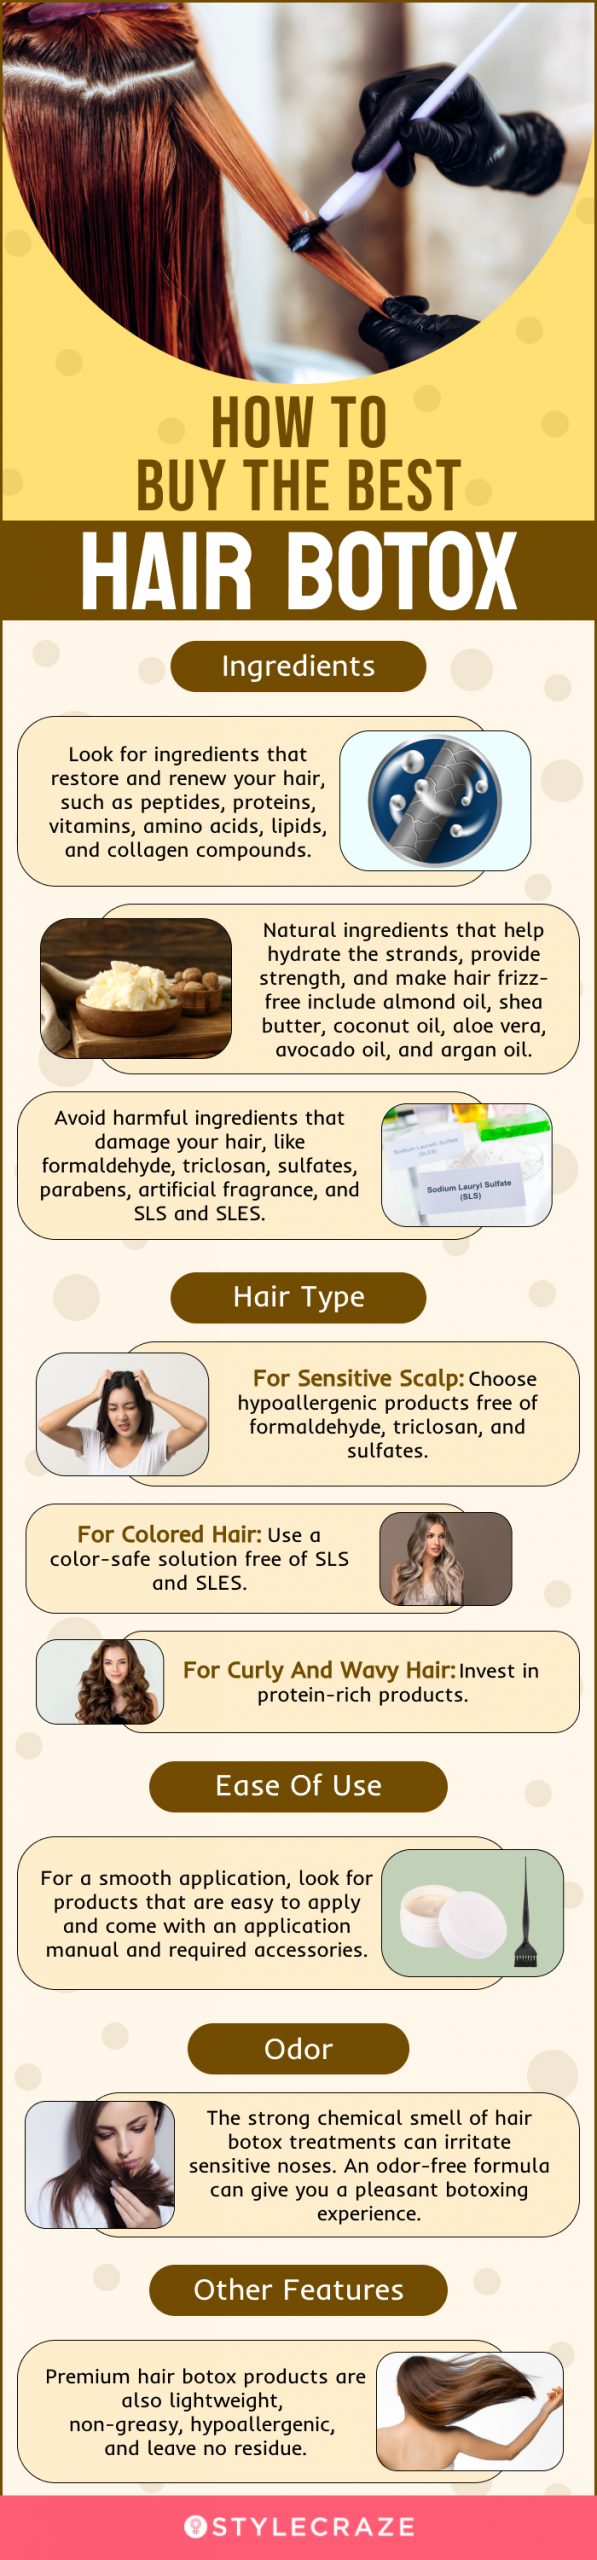 How To Buy The Best Hair Botox [infographic]